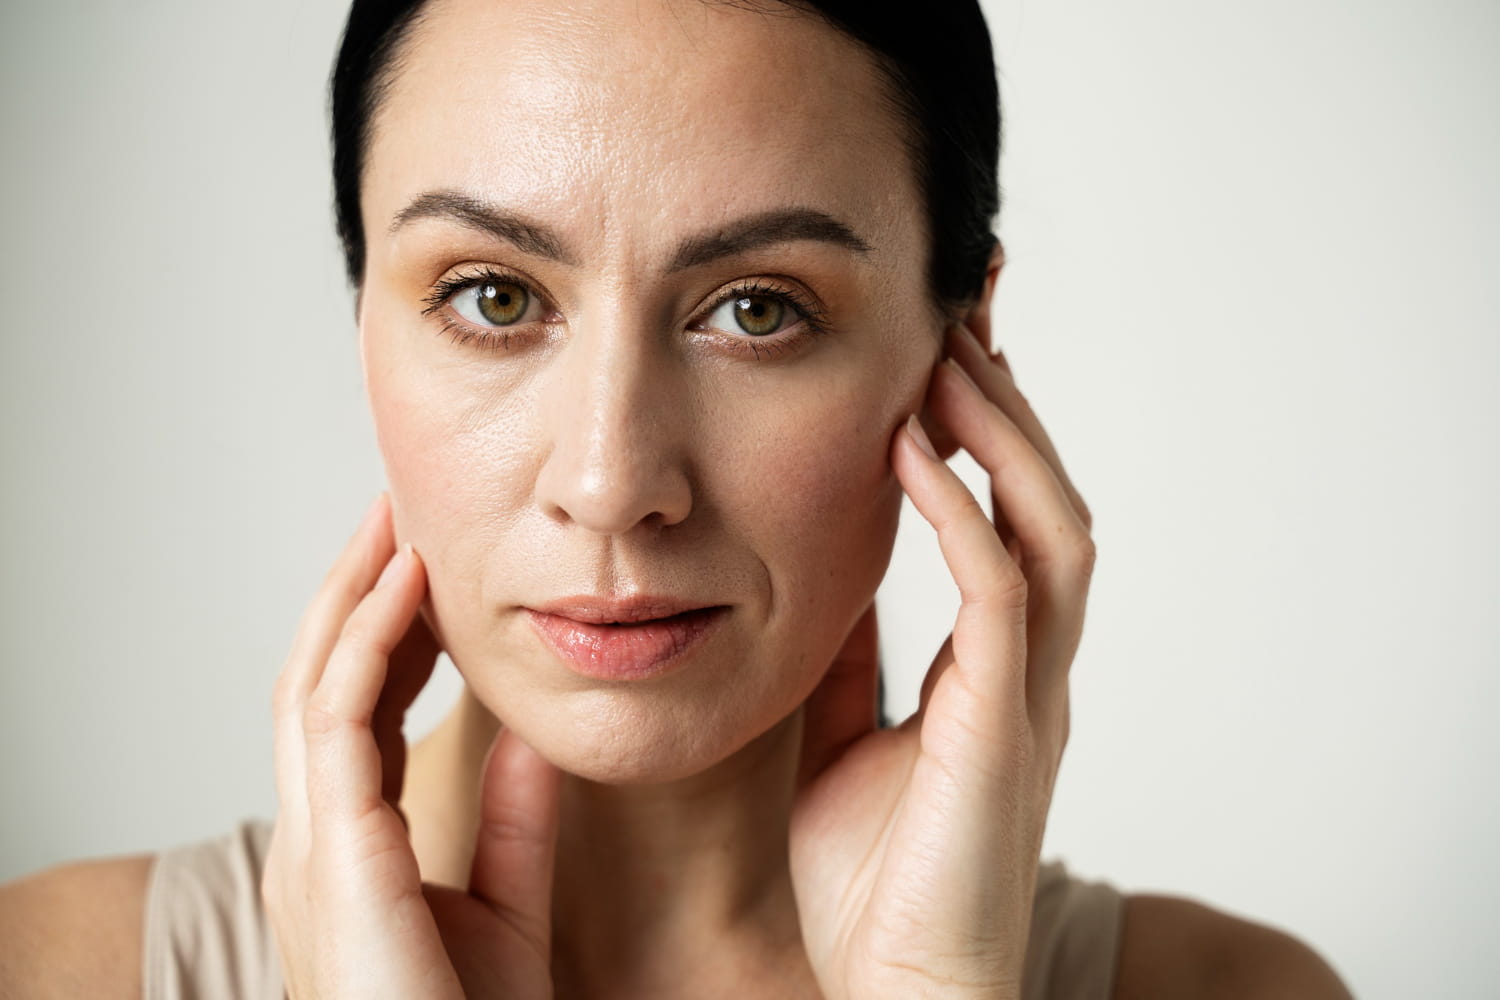 It is possible to slow down aging according to new research: discover how